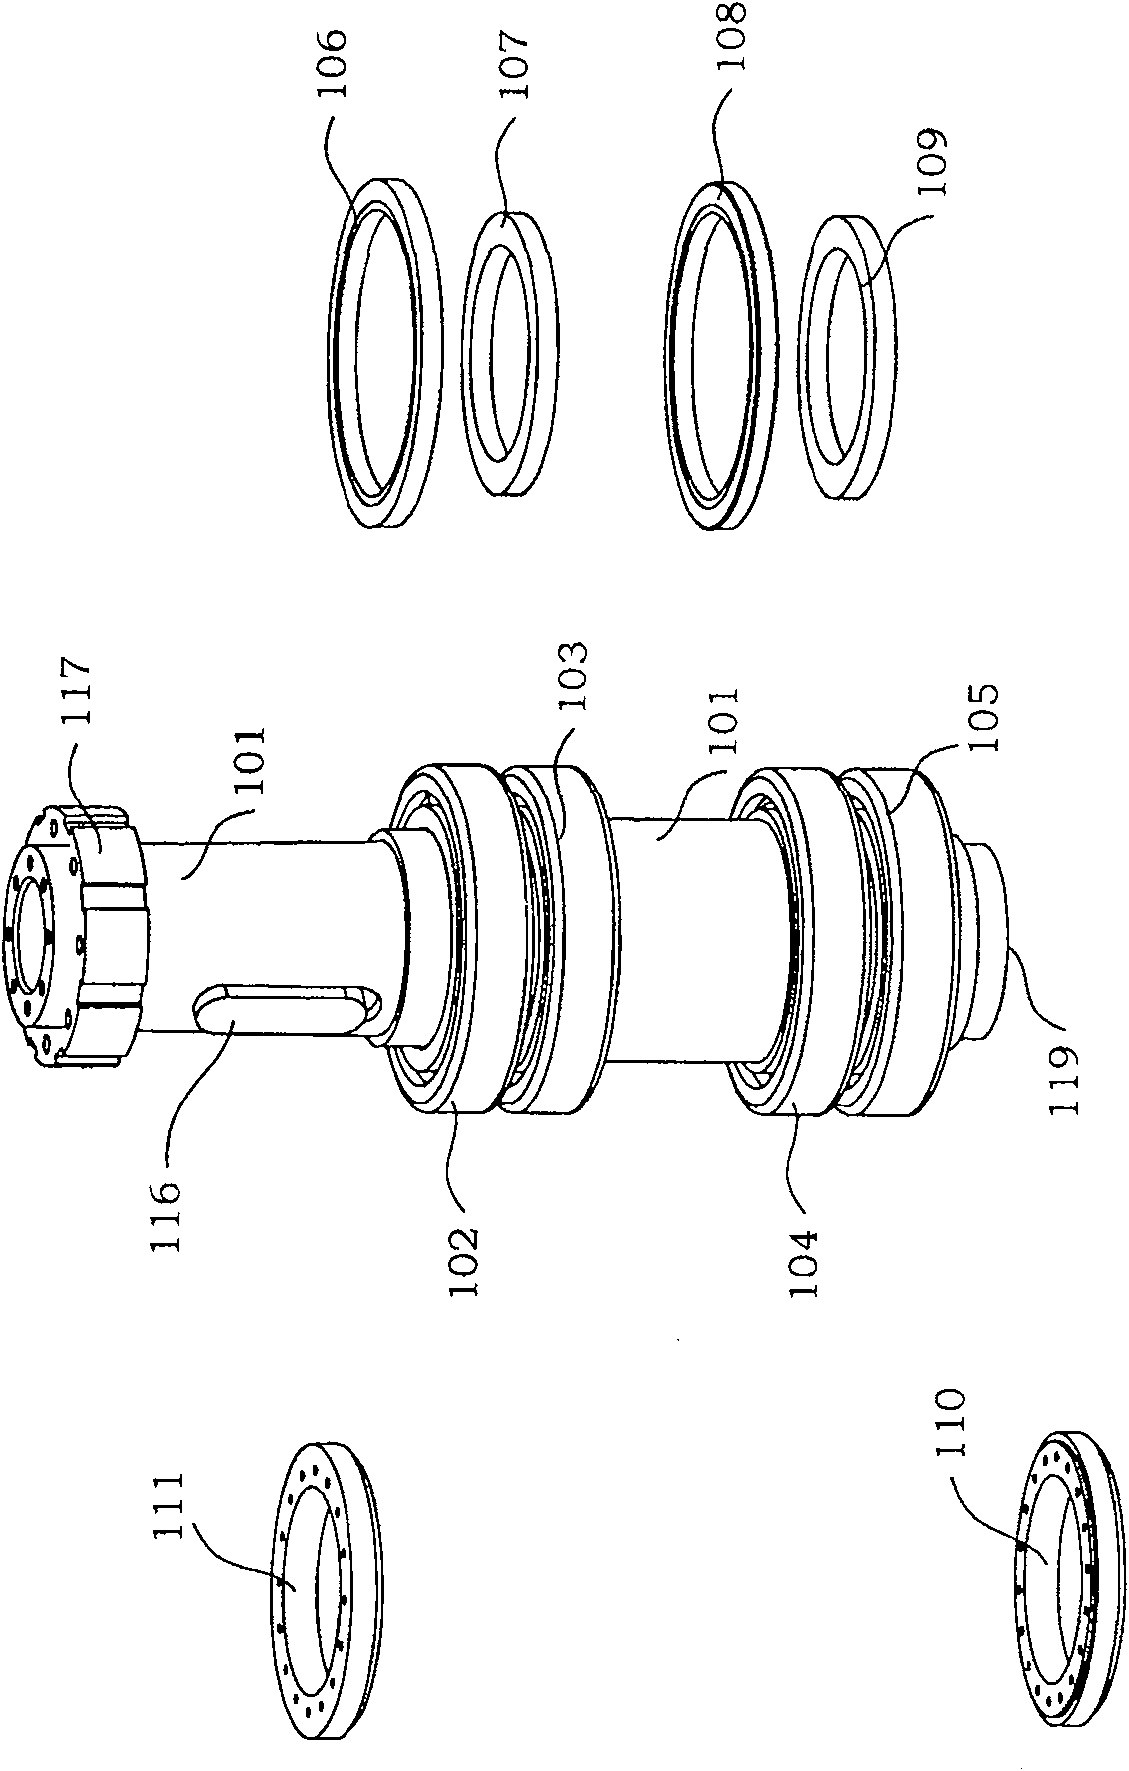 Principal shaft mechanism of two-position north seeker